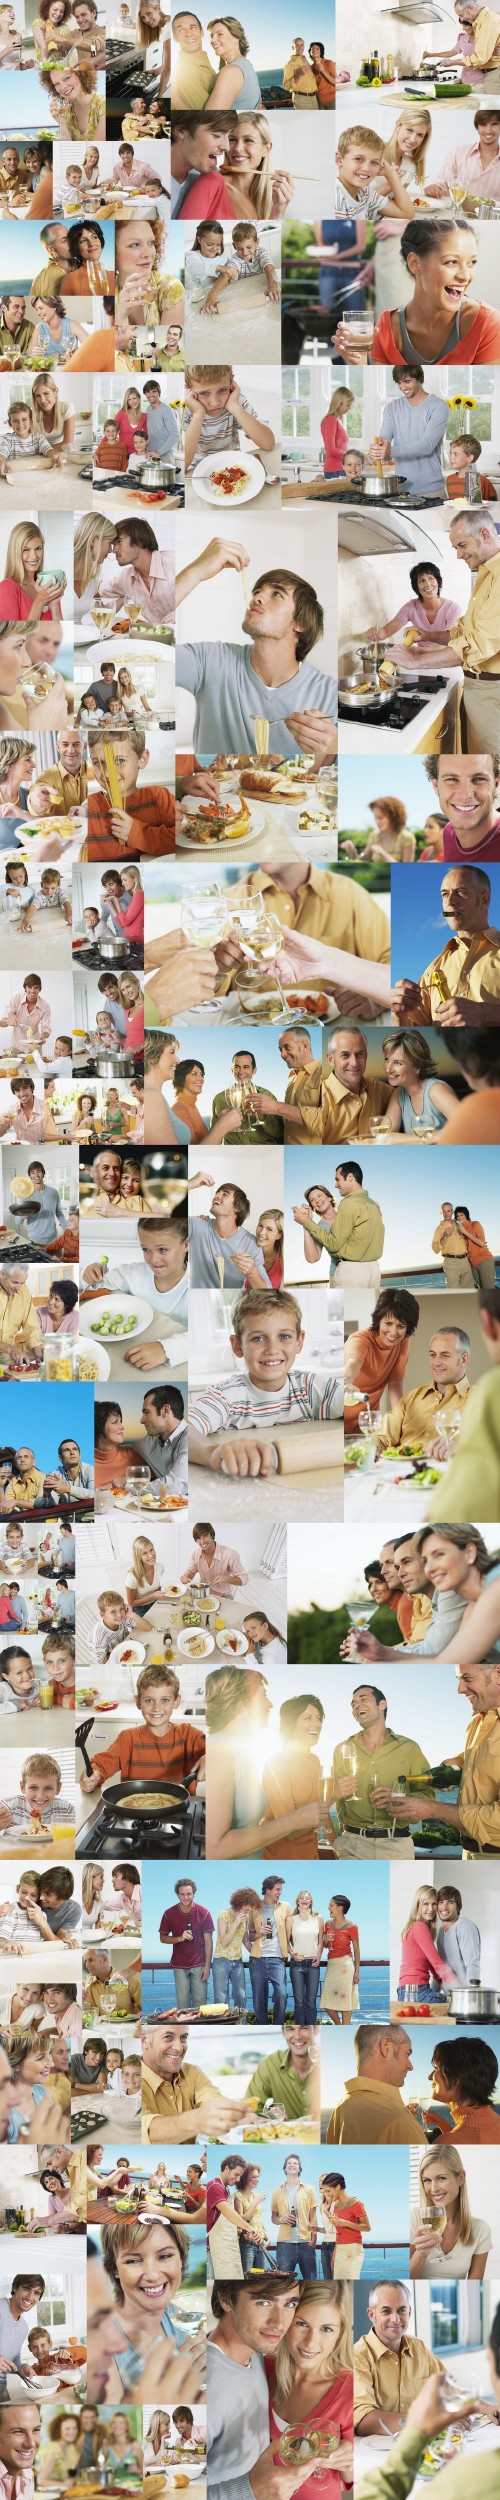 Stock Photos - Eating Together